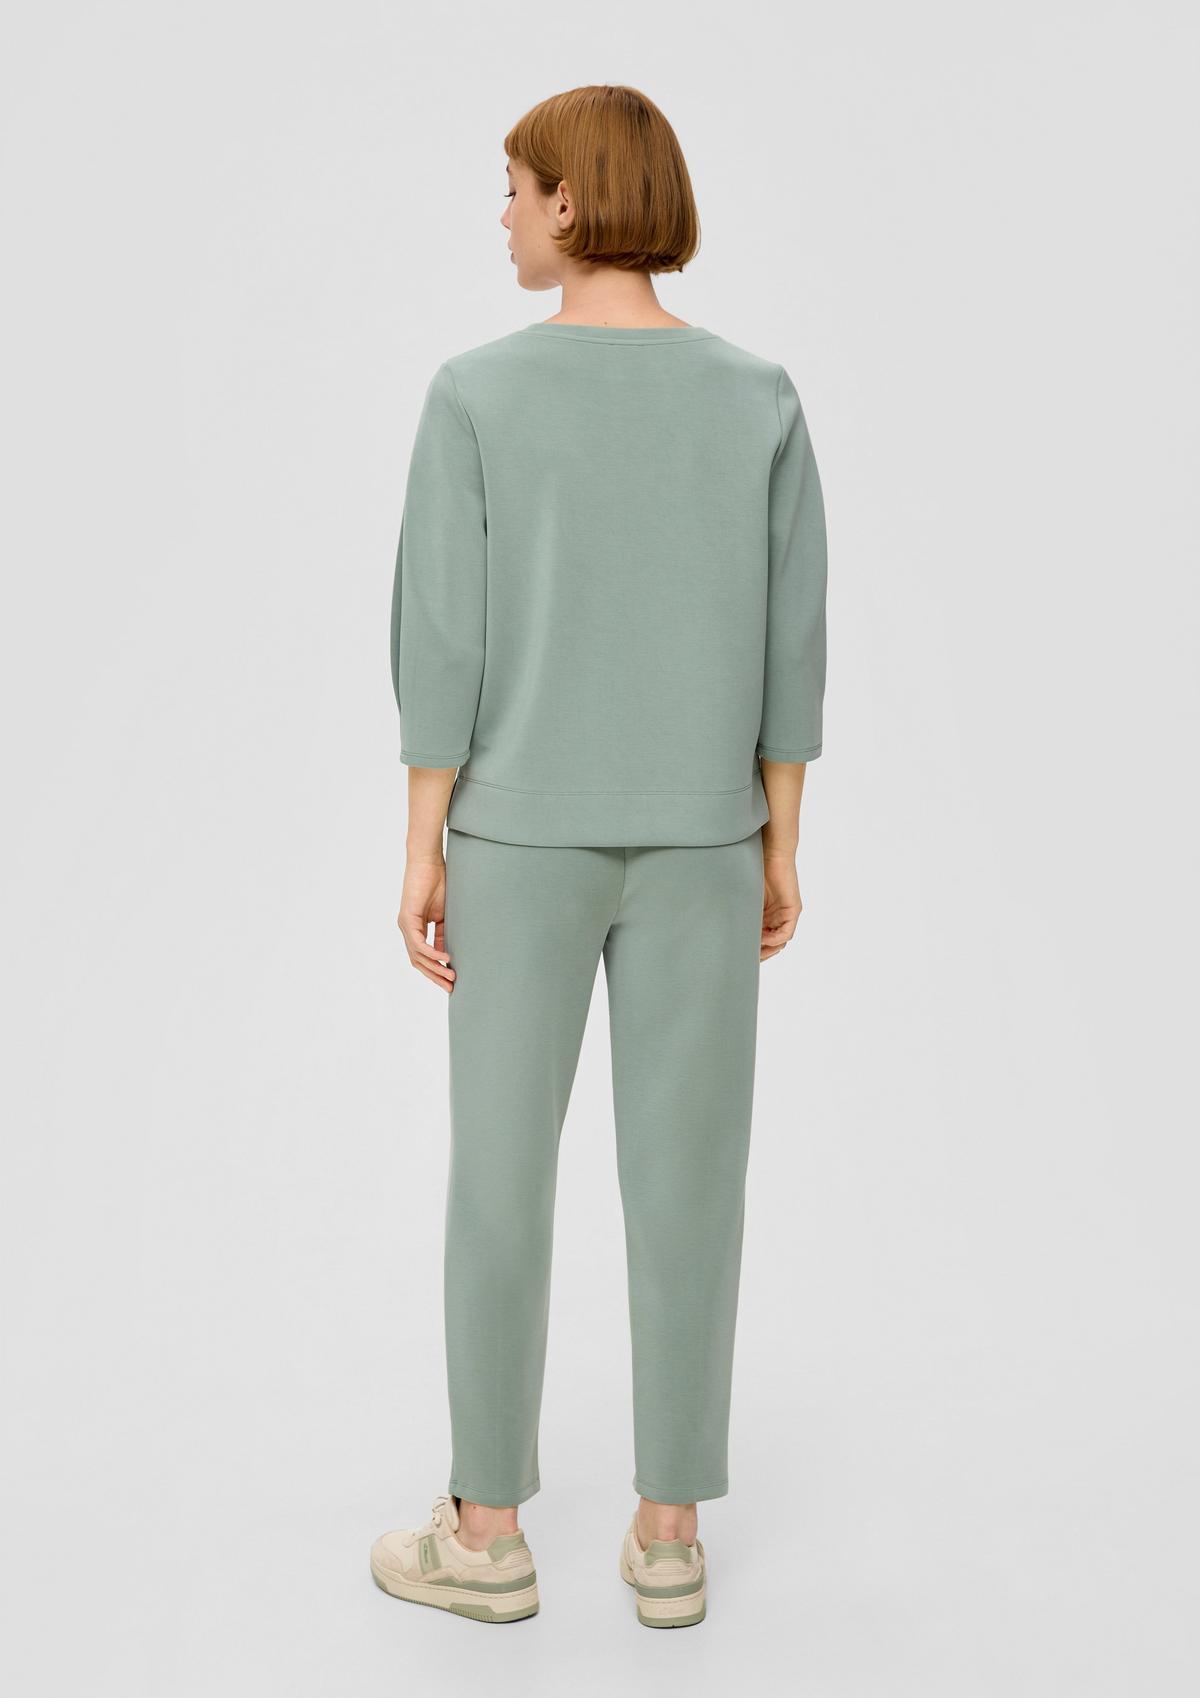 s.Oliver Scuba sweatshirt with a pleat